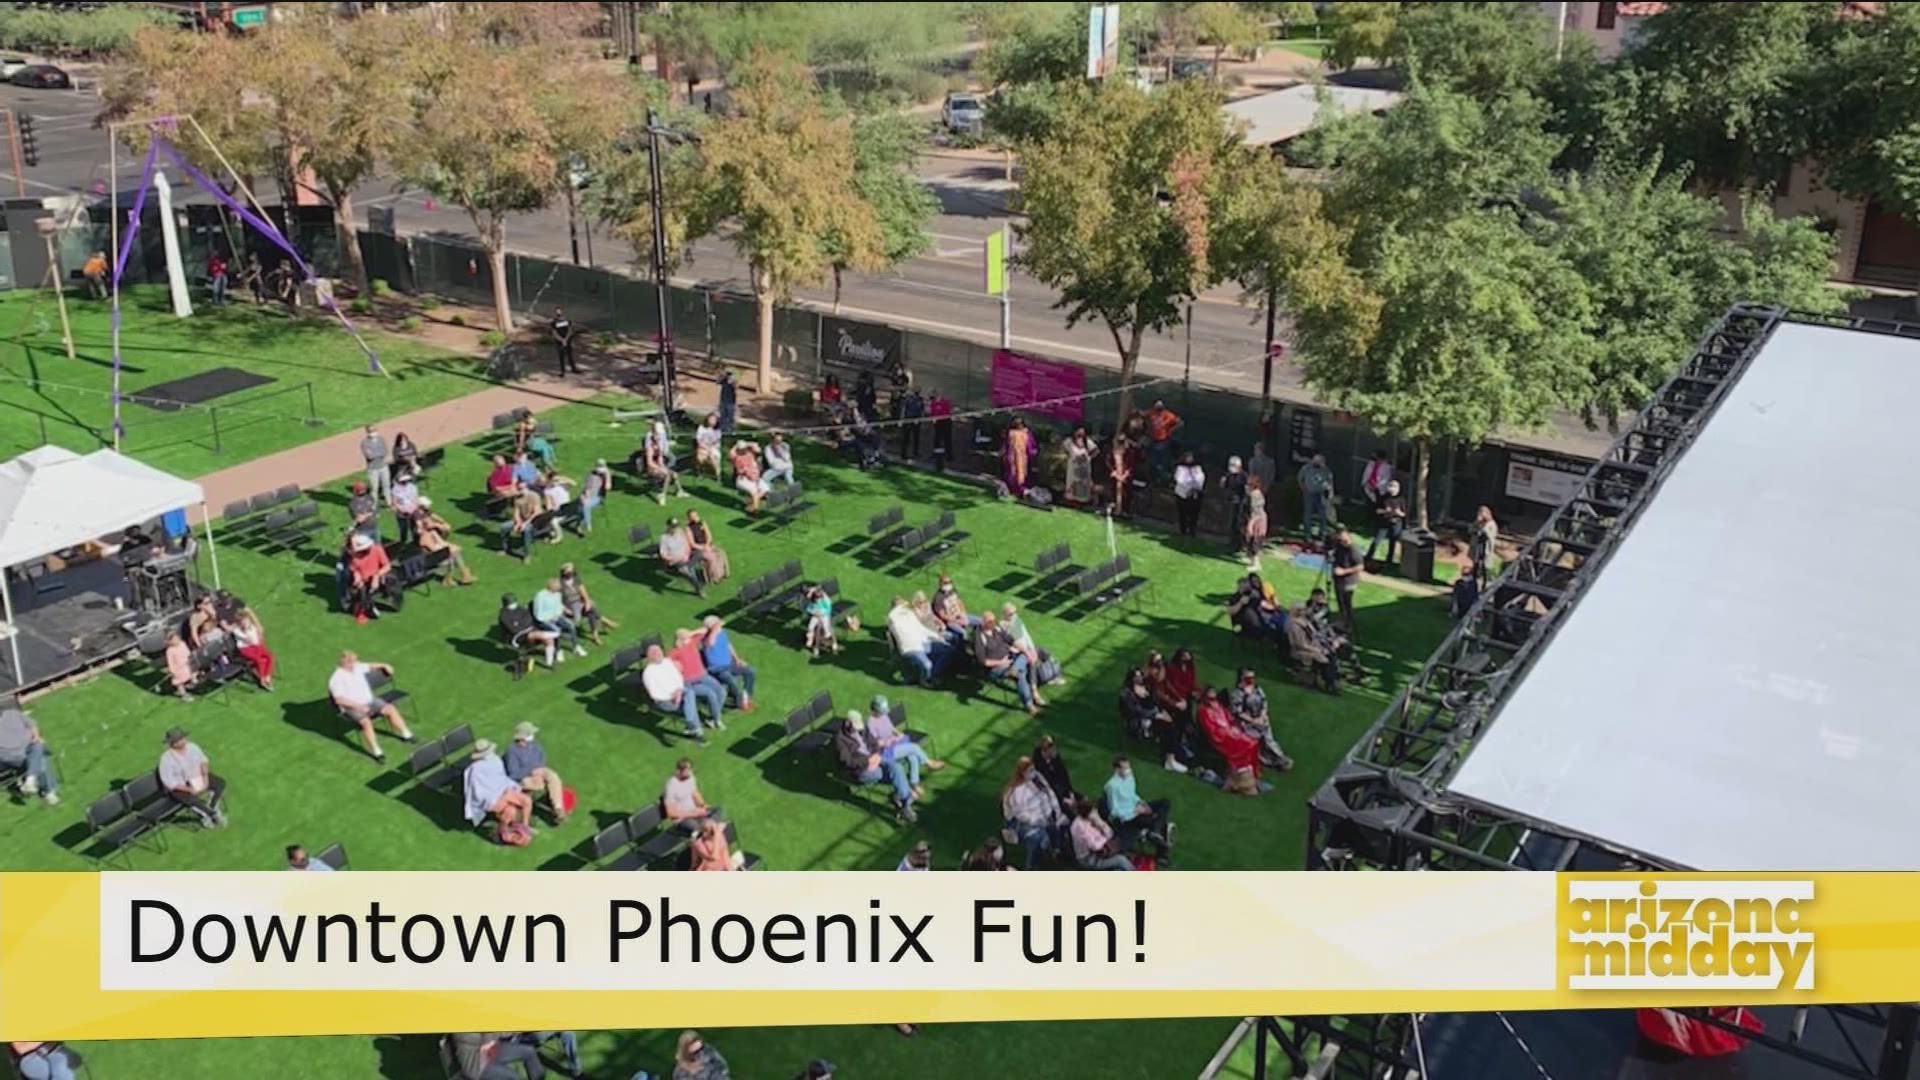 We check in with RJ Price from Downtown Phoenix Inc. to see the fun events coming up plus how we can support local businesses!